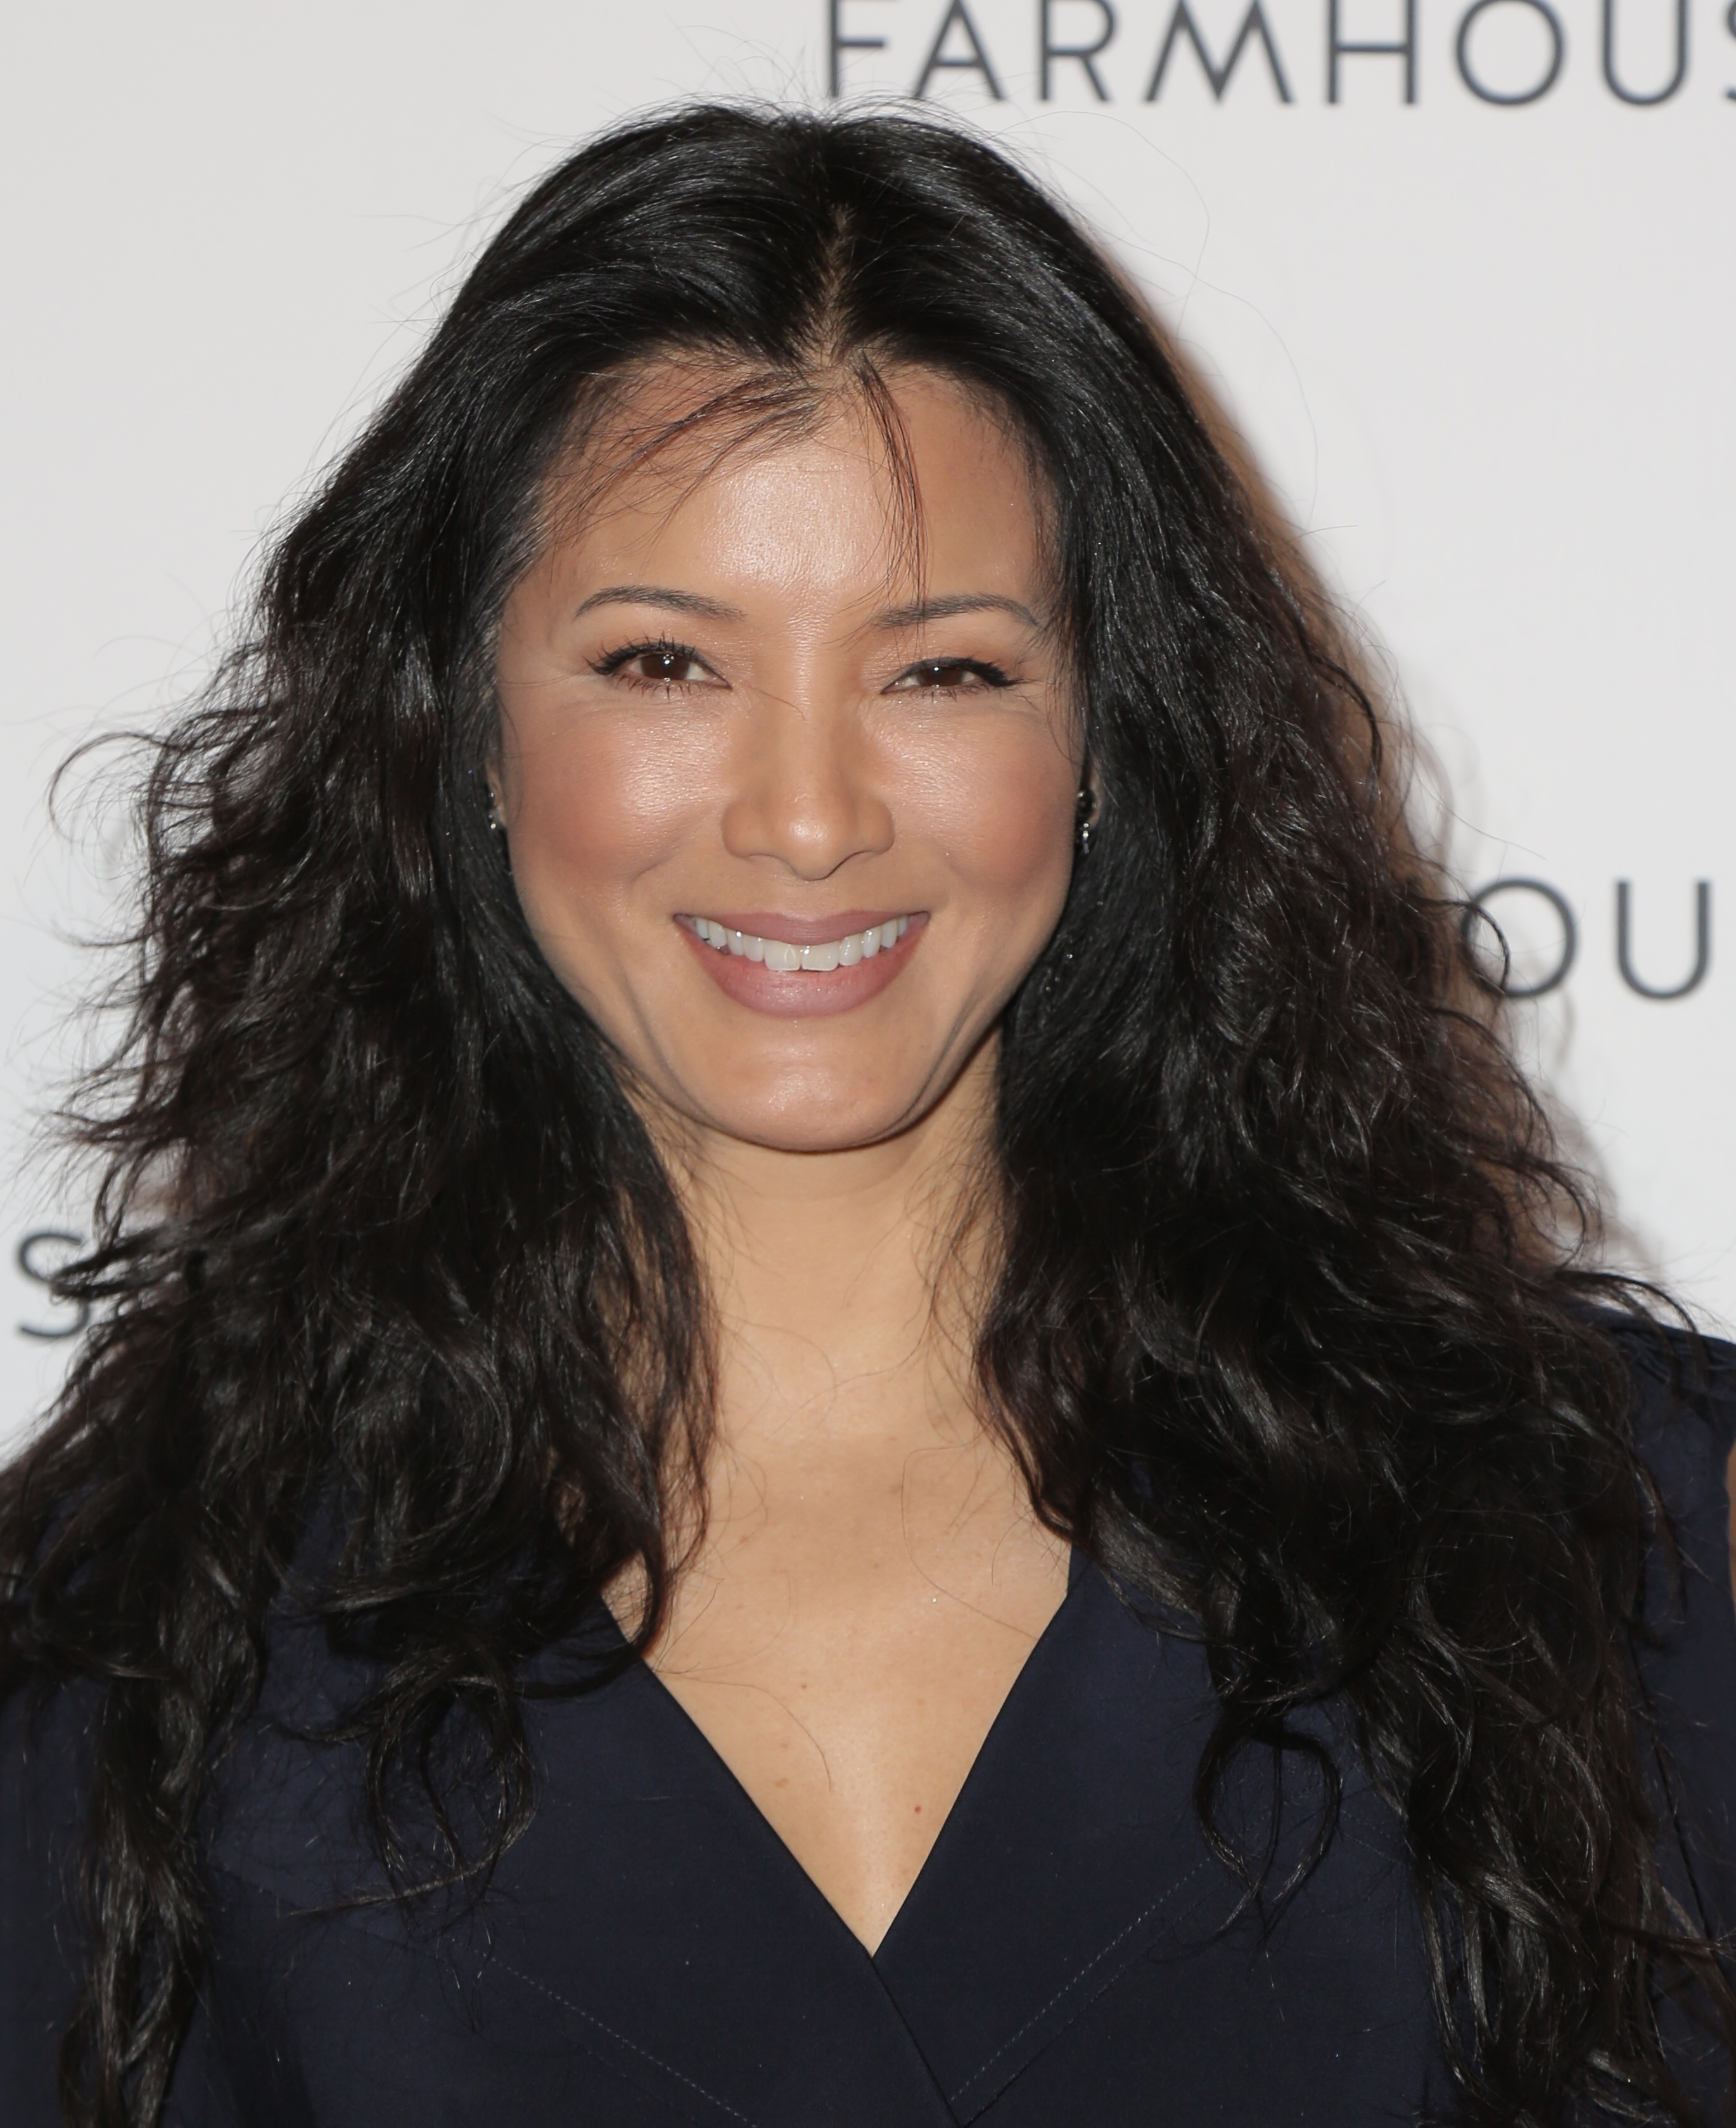 kelly-hu-grand-opening-of-farmhouse-held-at-the-beverly-center-31518-3.jpg